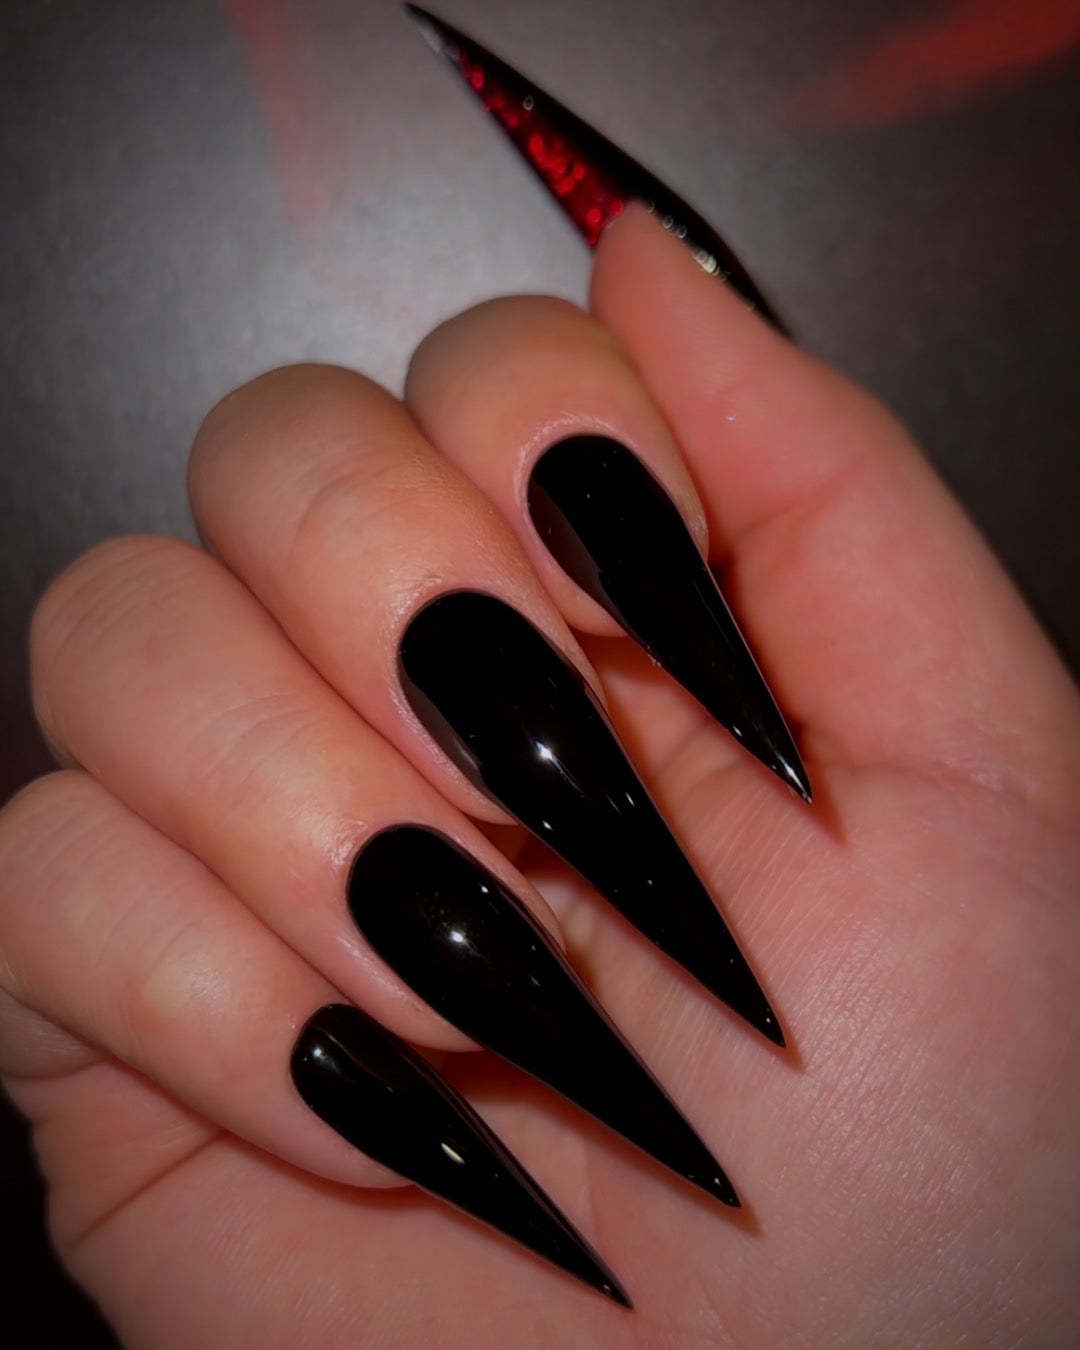 christopher selvin recommends black sharp nails pic